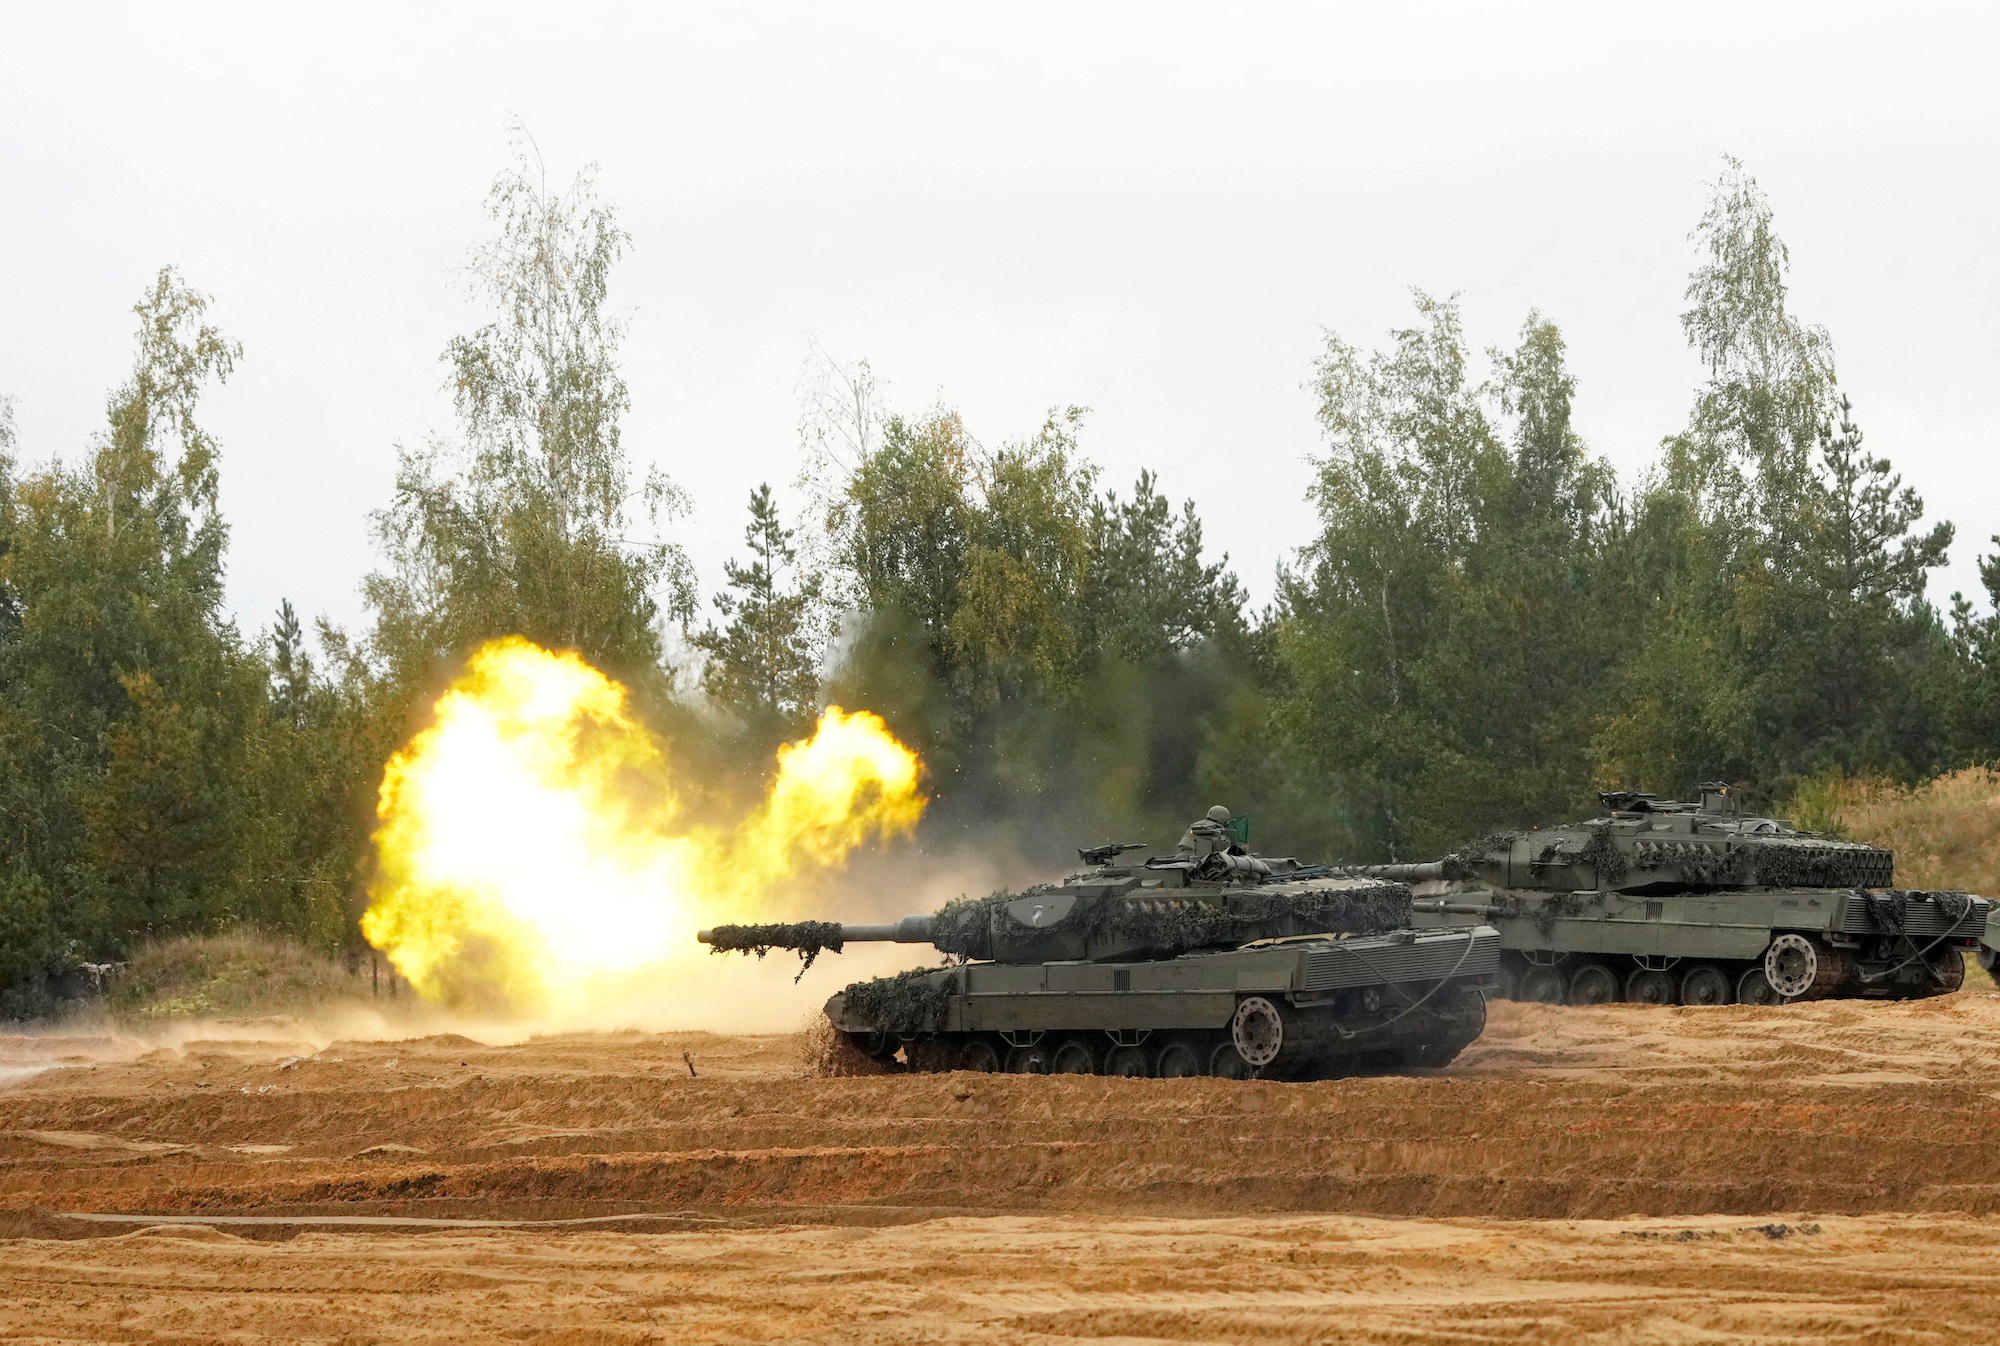 Leopard 2 tanks of the Spanish army fire during the final stage of the Latvian military exercises on September 29, 2022